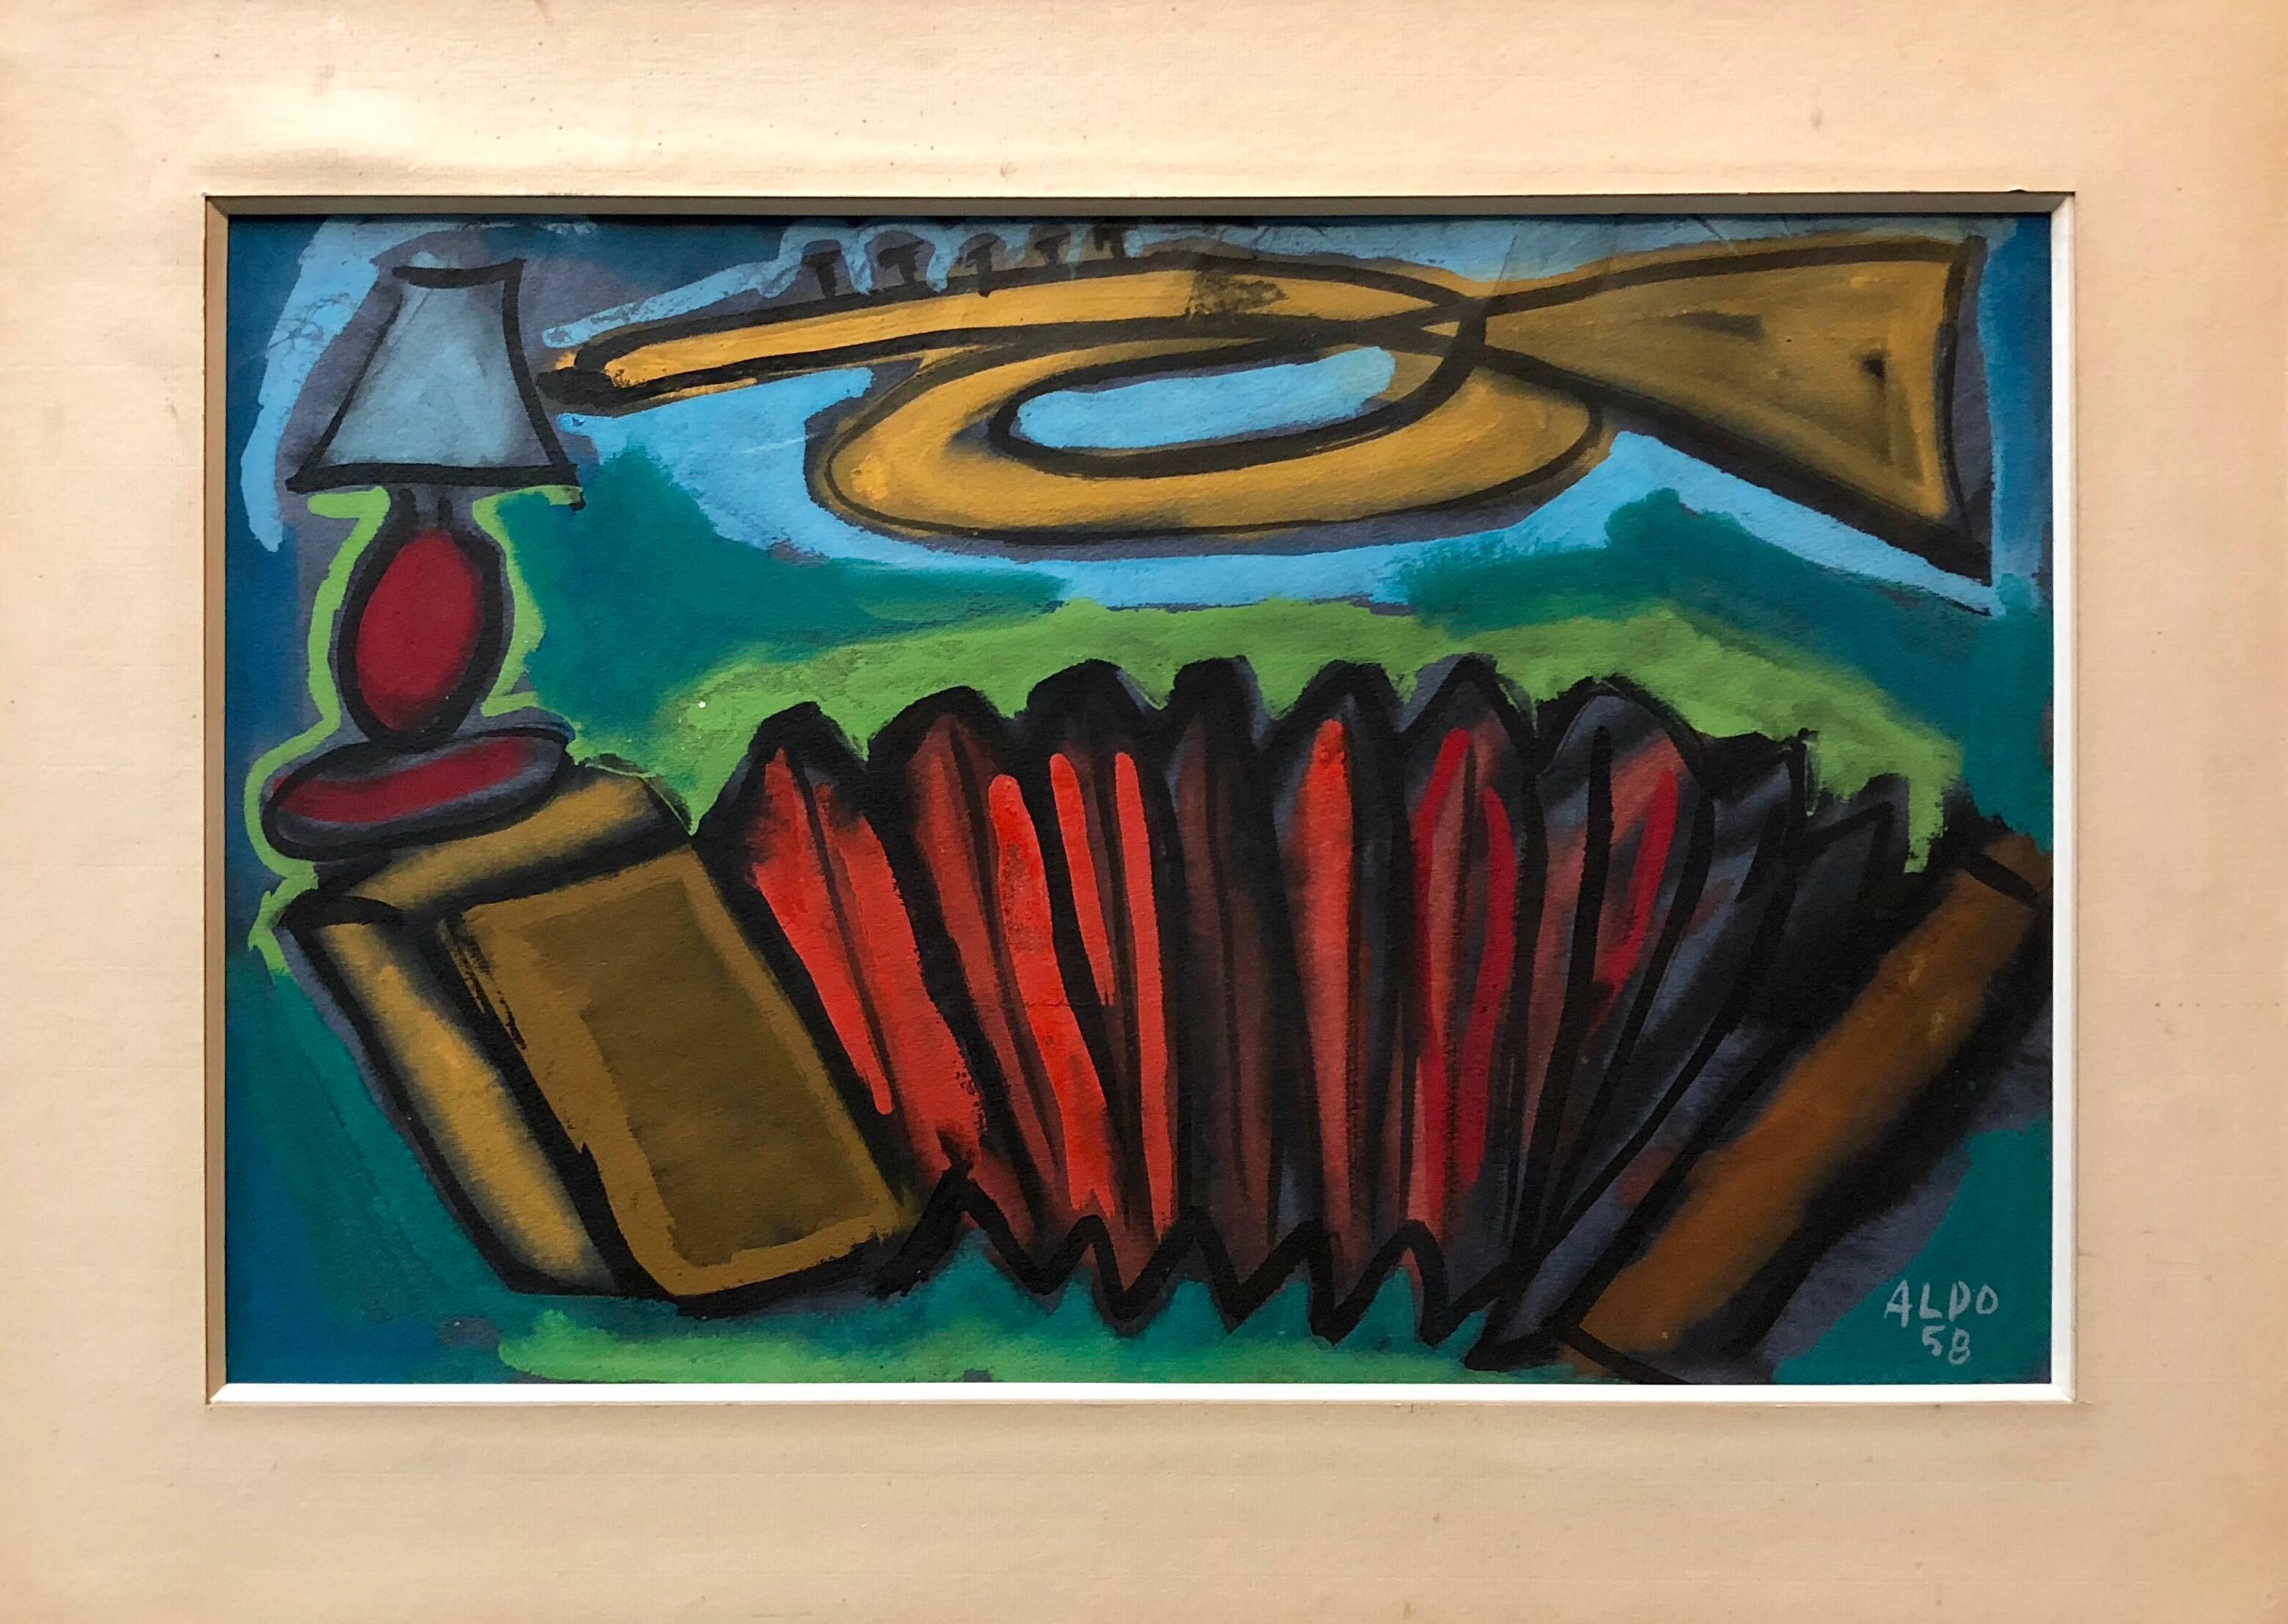 Bold Color French Modernist Painting 1958 Signed Aldo Abstract Still Life  - Black Abstract Painting by Unknown